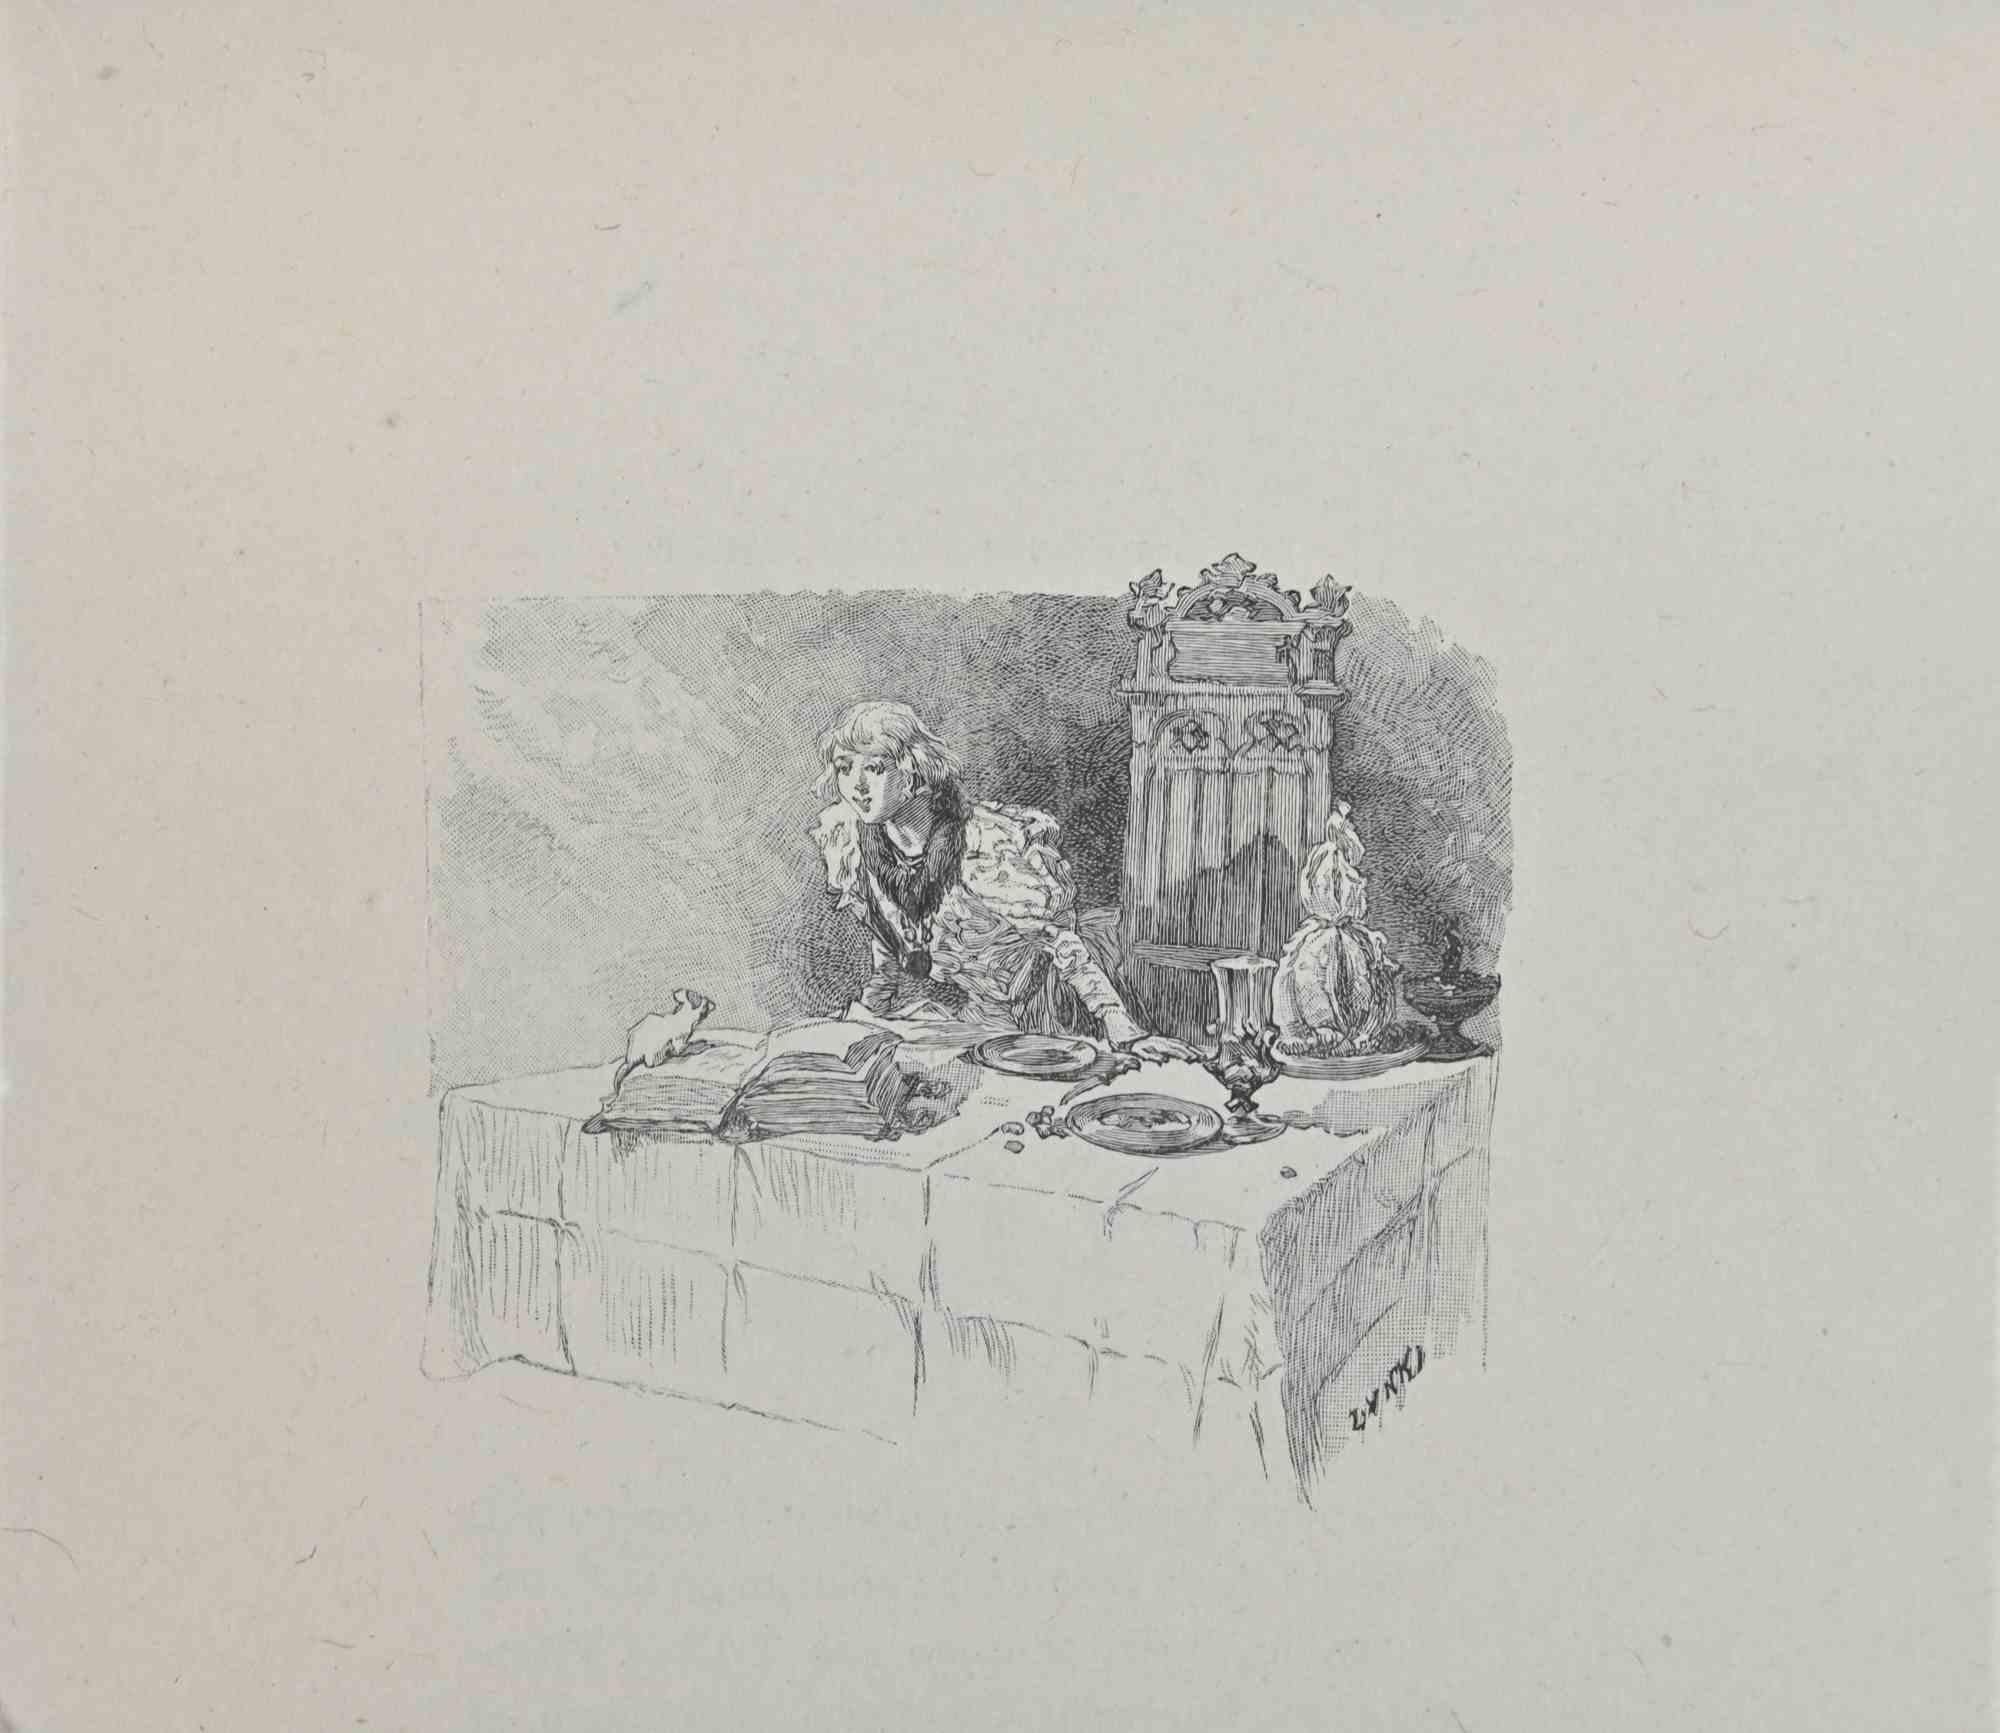 The Girl and Mouse - Lithograph by Hégésippe Moreau - Early 20th Century